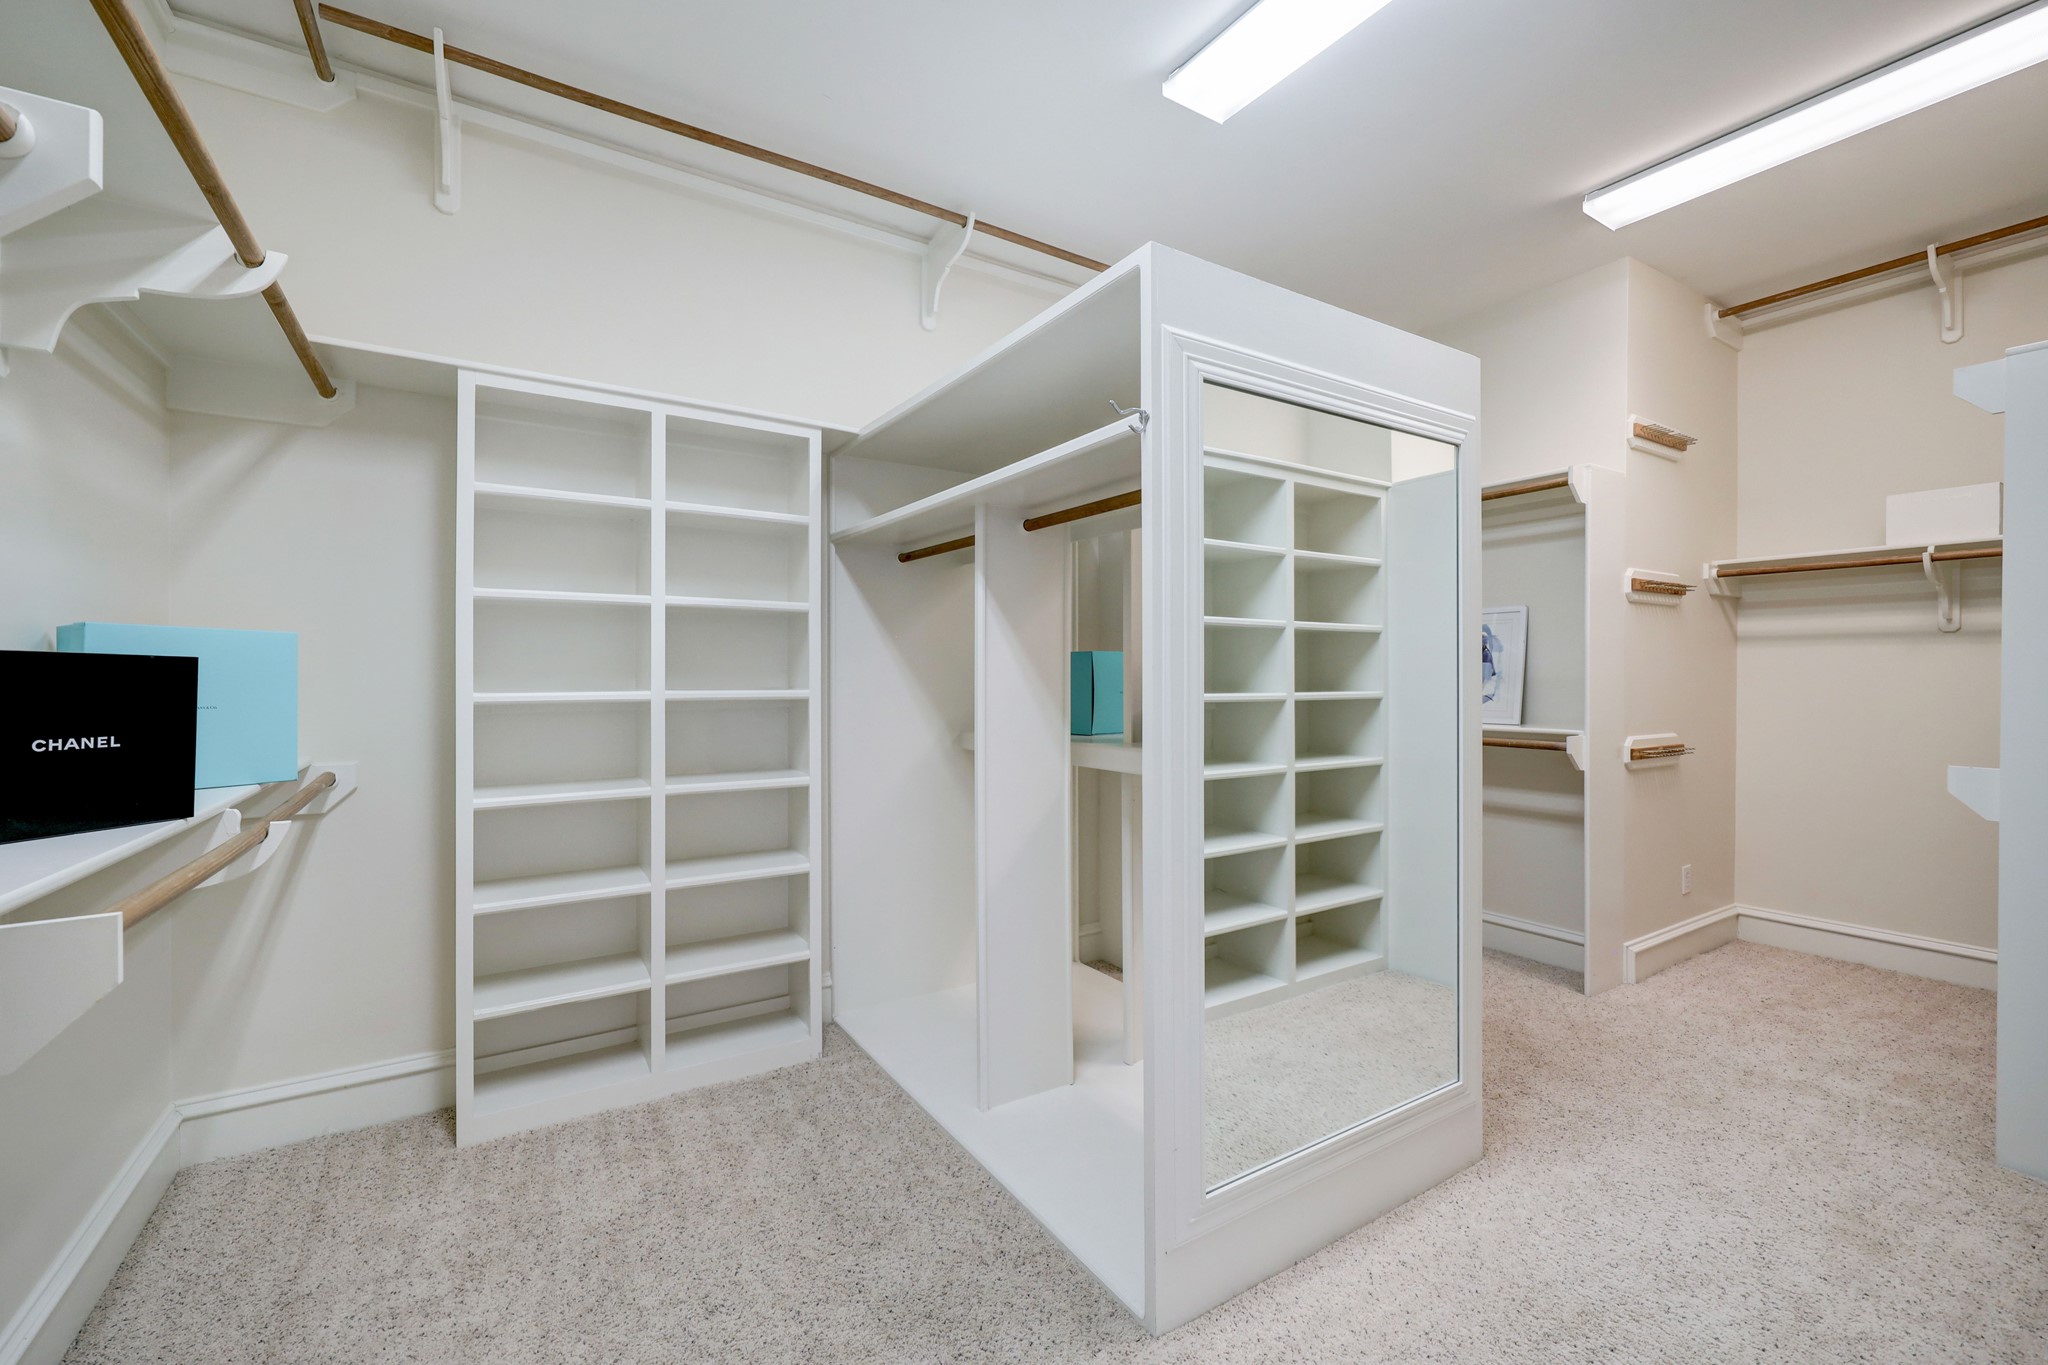 The walk-in closet features a myriad of shelving and hanging options for both sides of an extensive wardrobe.